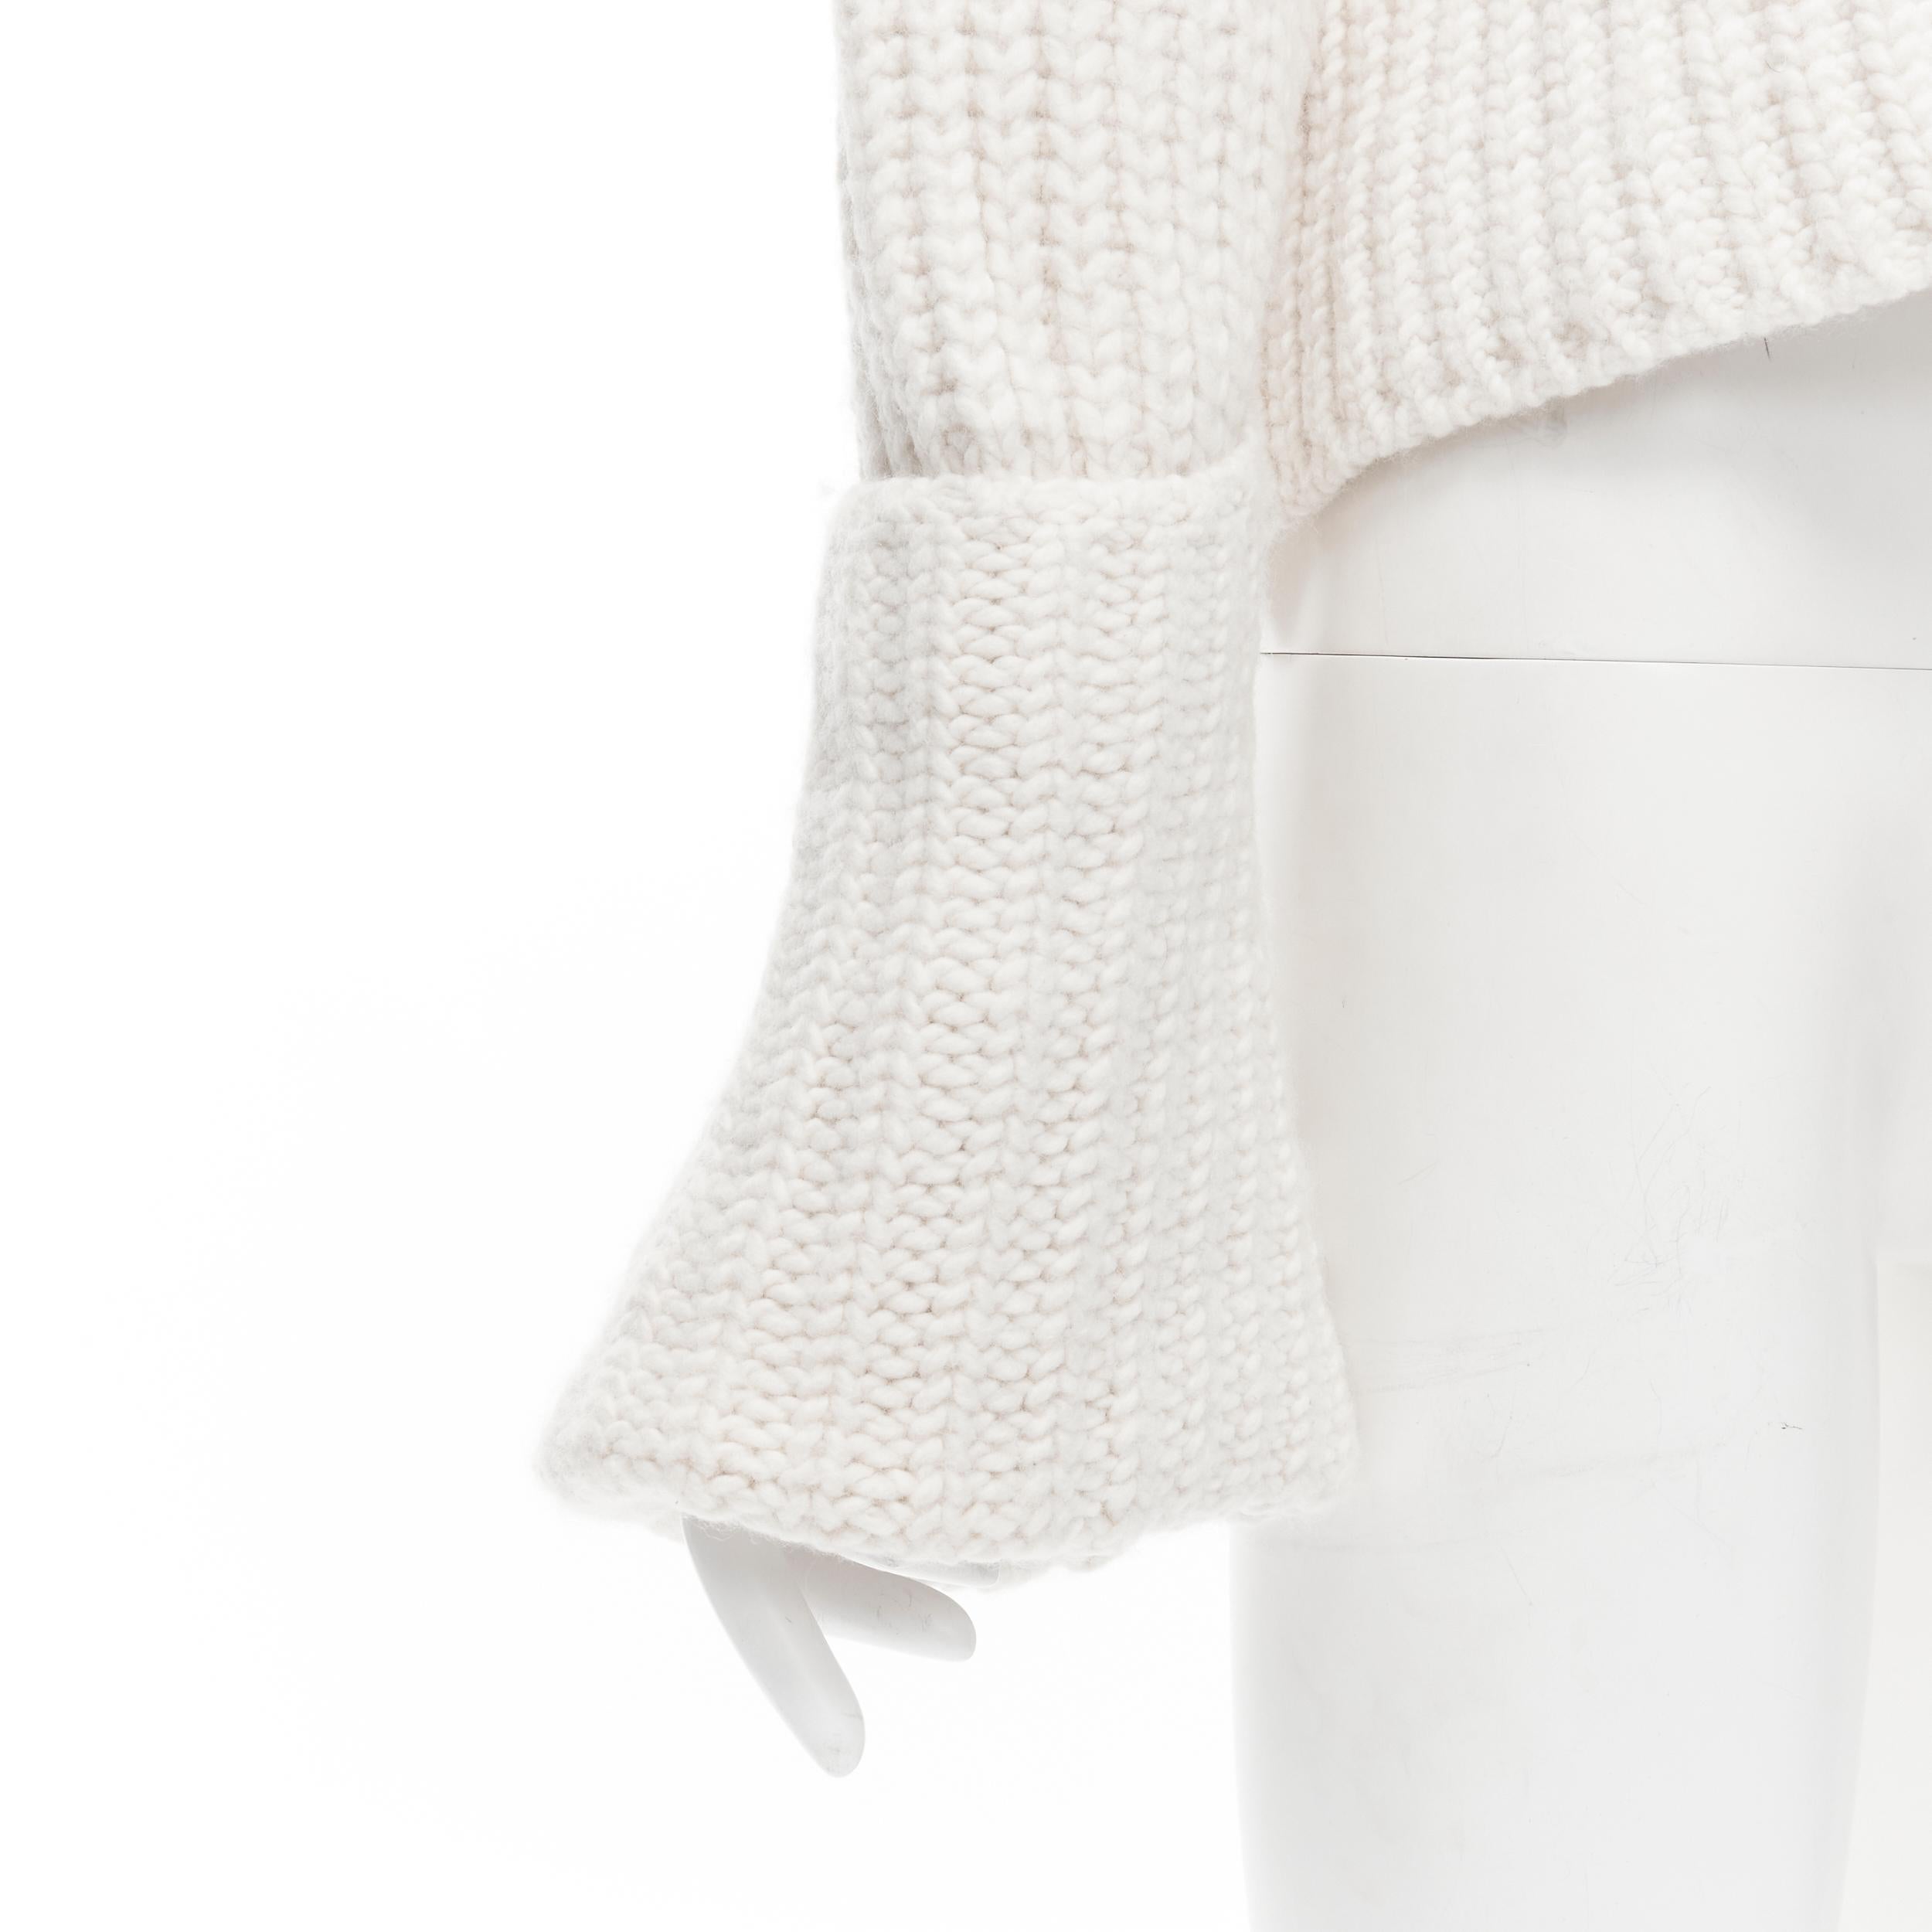 OLD CELINE Phoebe Philo heavy knit wool cuffed sleeve cropped sweater XS 
Reference: TGAS/B01874 
Brand: Celine 
Designer: Phoebe Philo 
Material: Wool 
Color: White 
Pattern: Solid 
Extra Detail: Heavy chunky knit. Bell shaped cuffed skeeves.